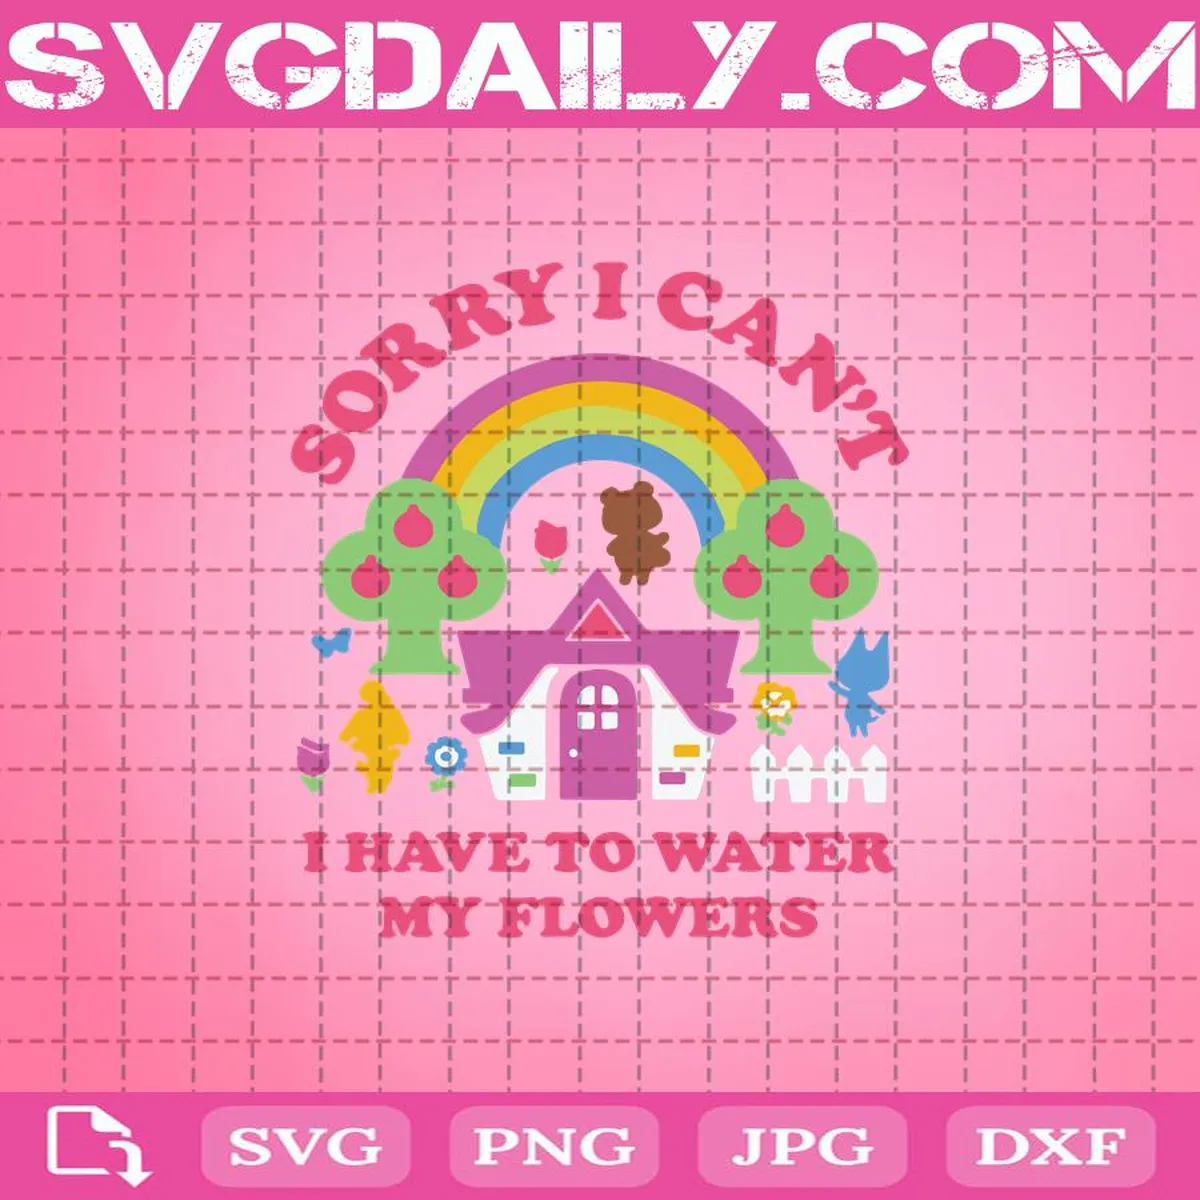 Animal Crossing Sorry I Can’t I Have To Water My Flowers Svg, Animal Crossing Svg, Nintendo Svg, Funny Video Gamer Gaming Svg